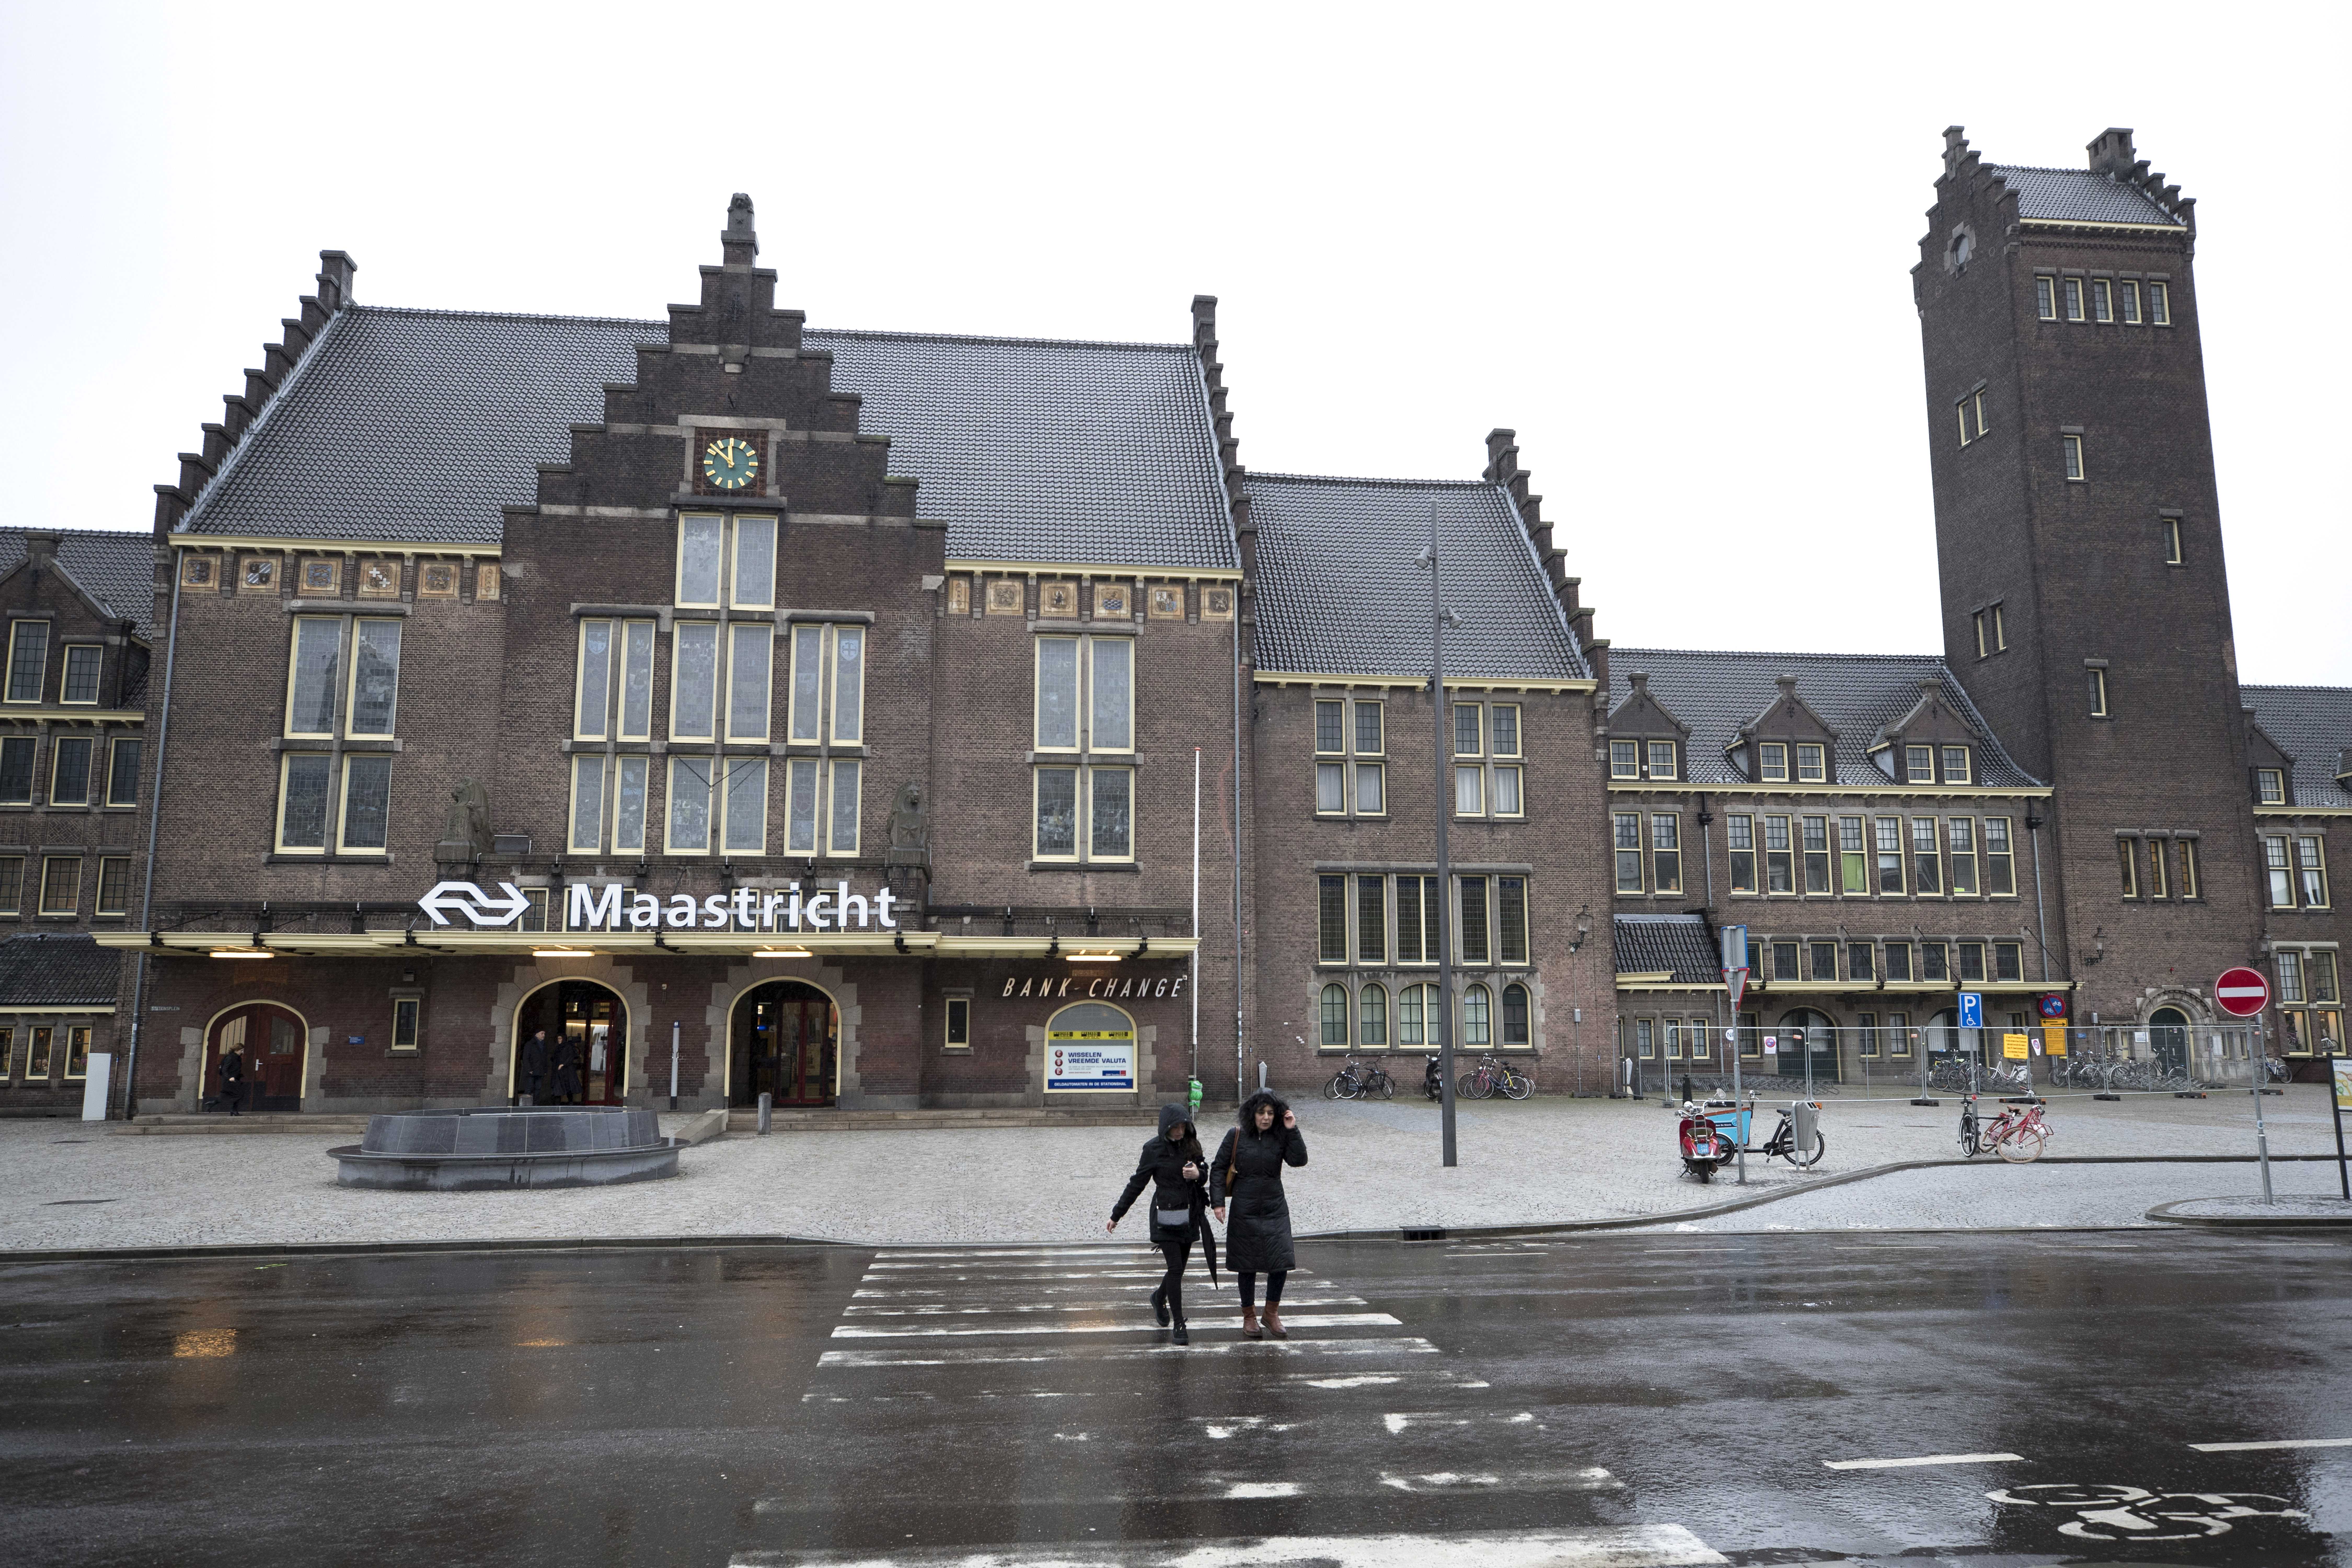 Maastricht station finally inaugurated after 105 years